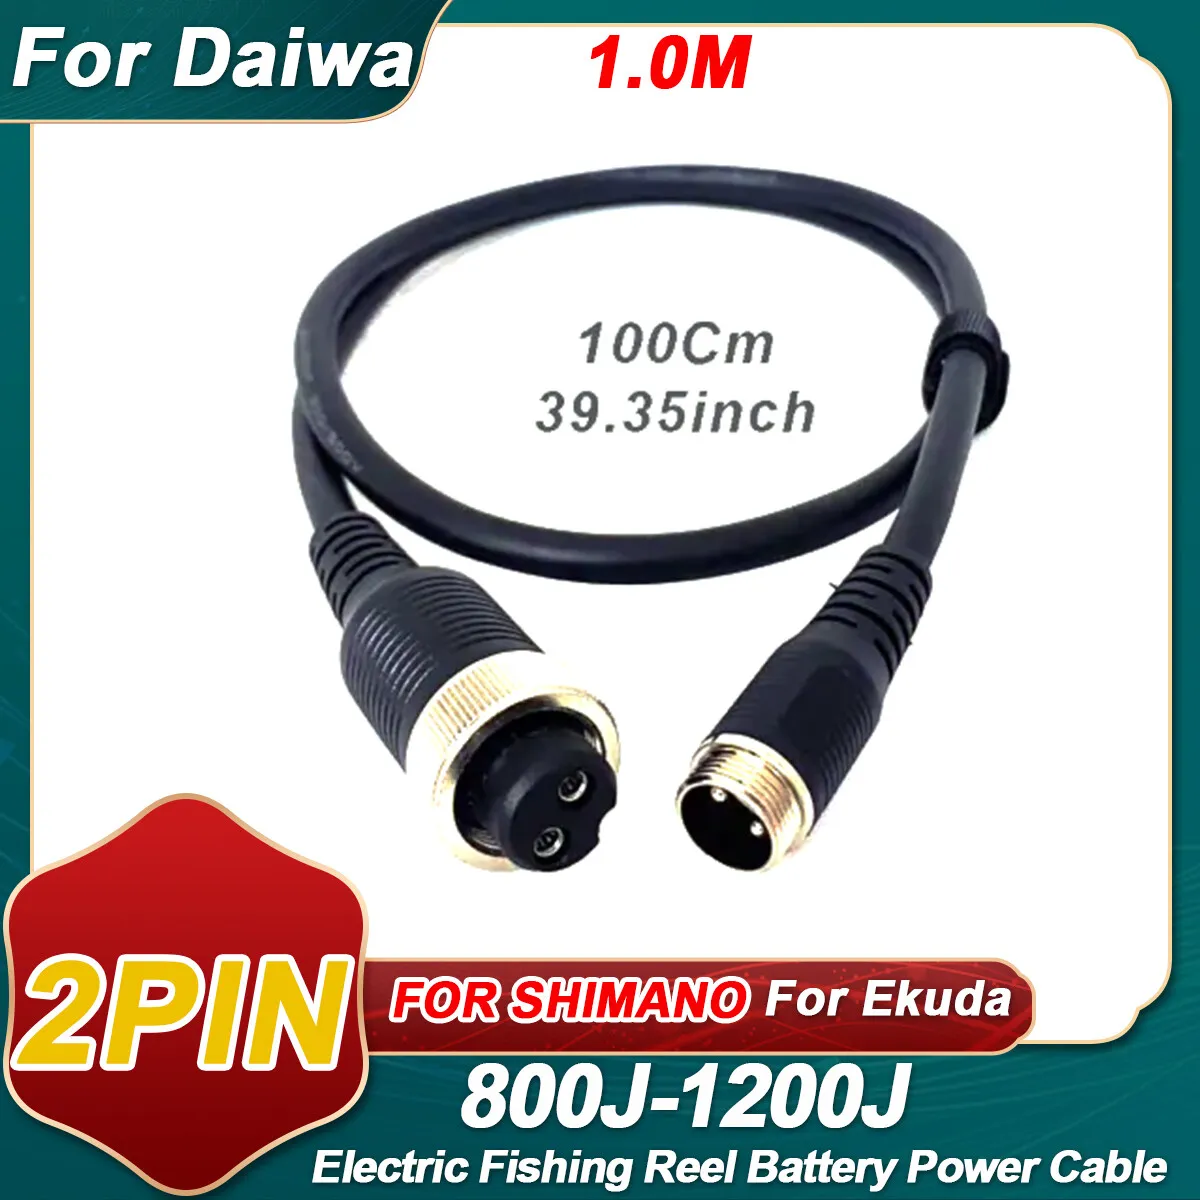 3.0M Power Cable For Daiwa 1200MJ 1200J 800MJ 800MJS Electric Reel